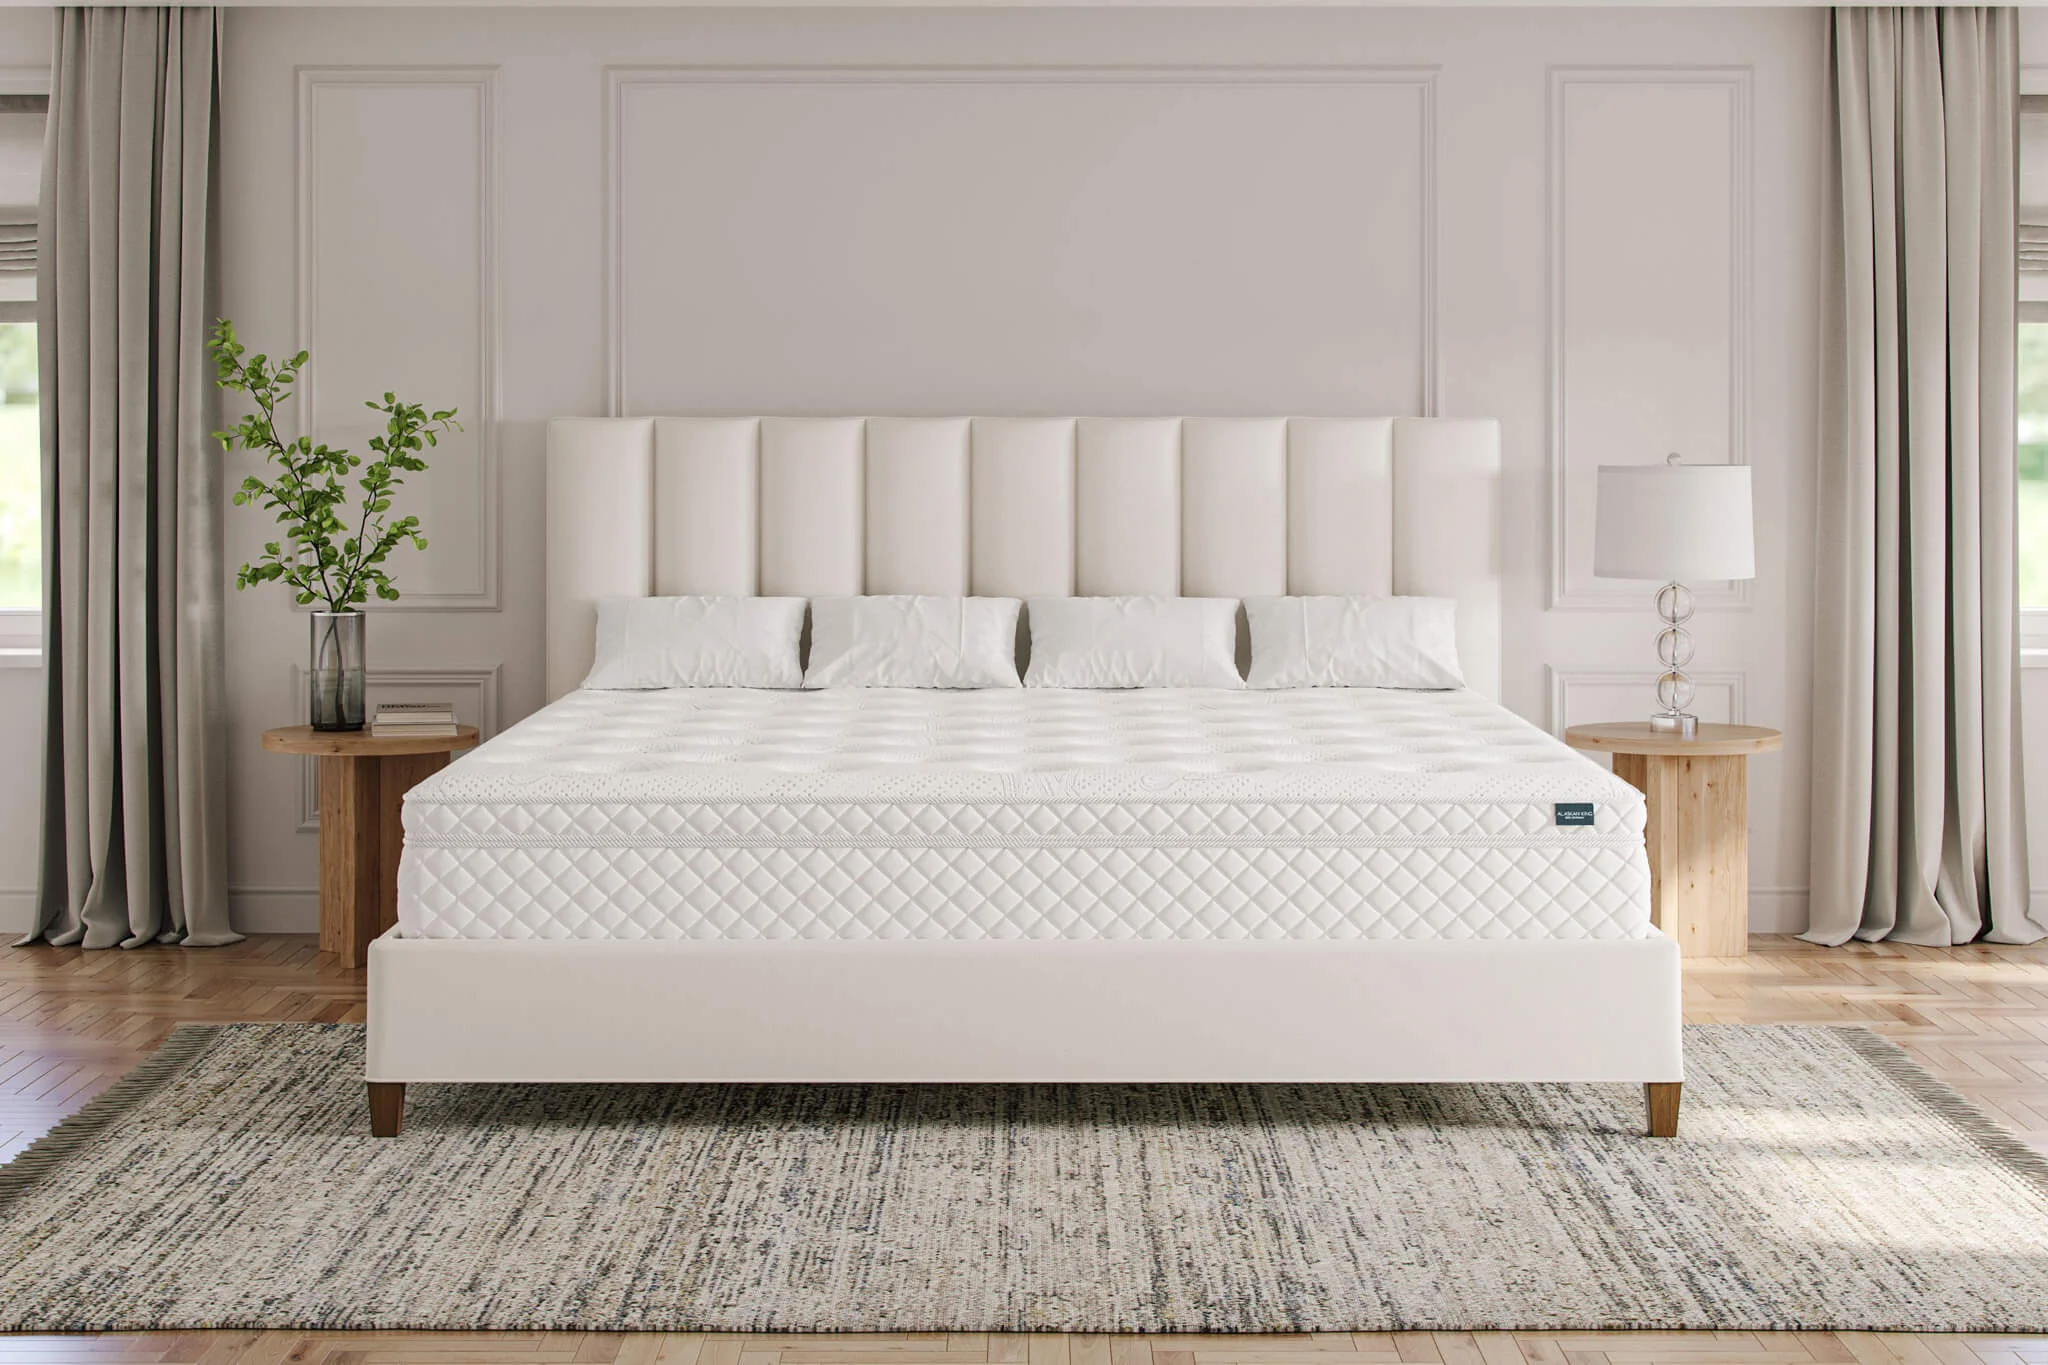 Sleep Like Royalty: The Benefits of Upgrading to a King Mattress